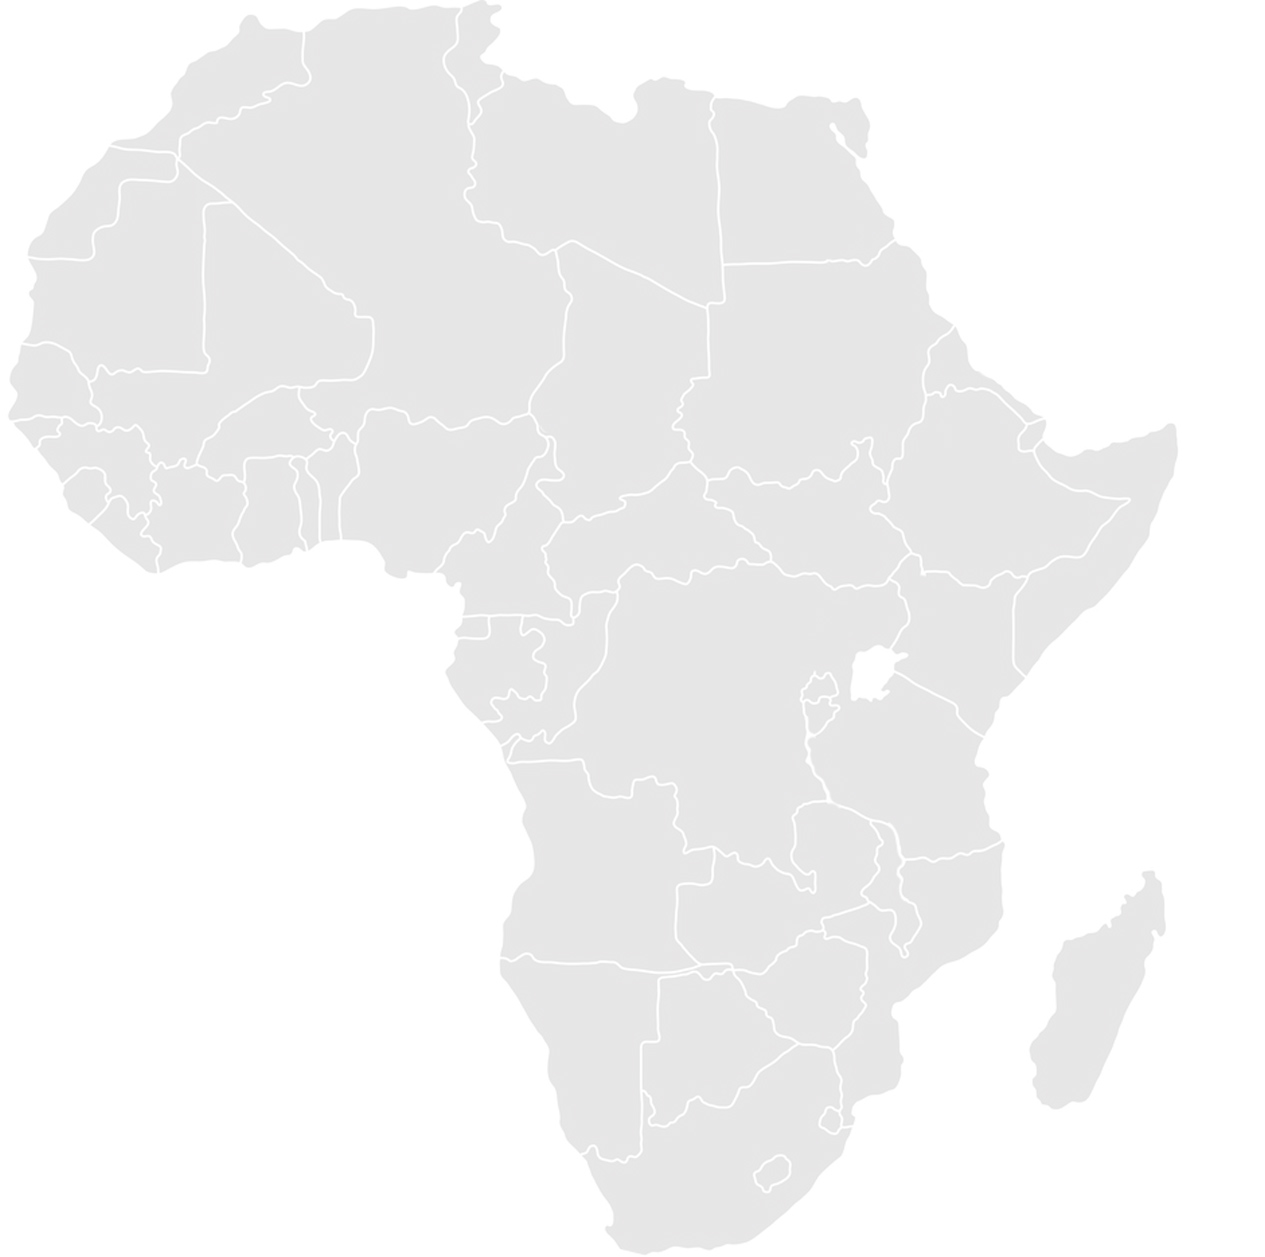 Gray map of Africa